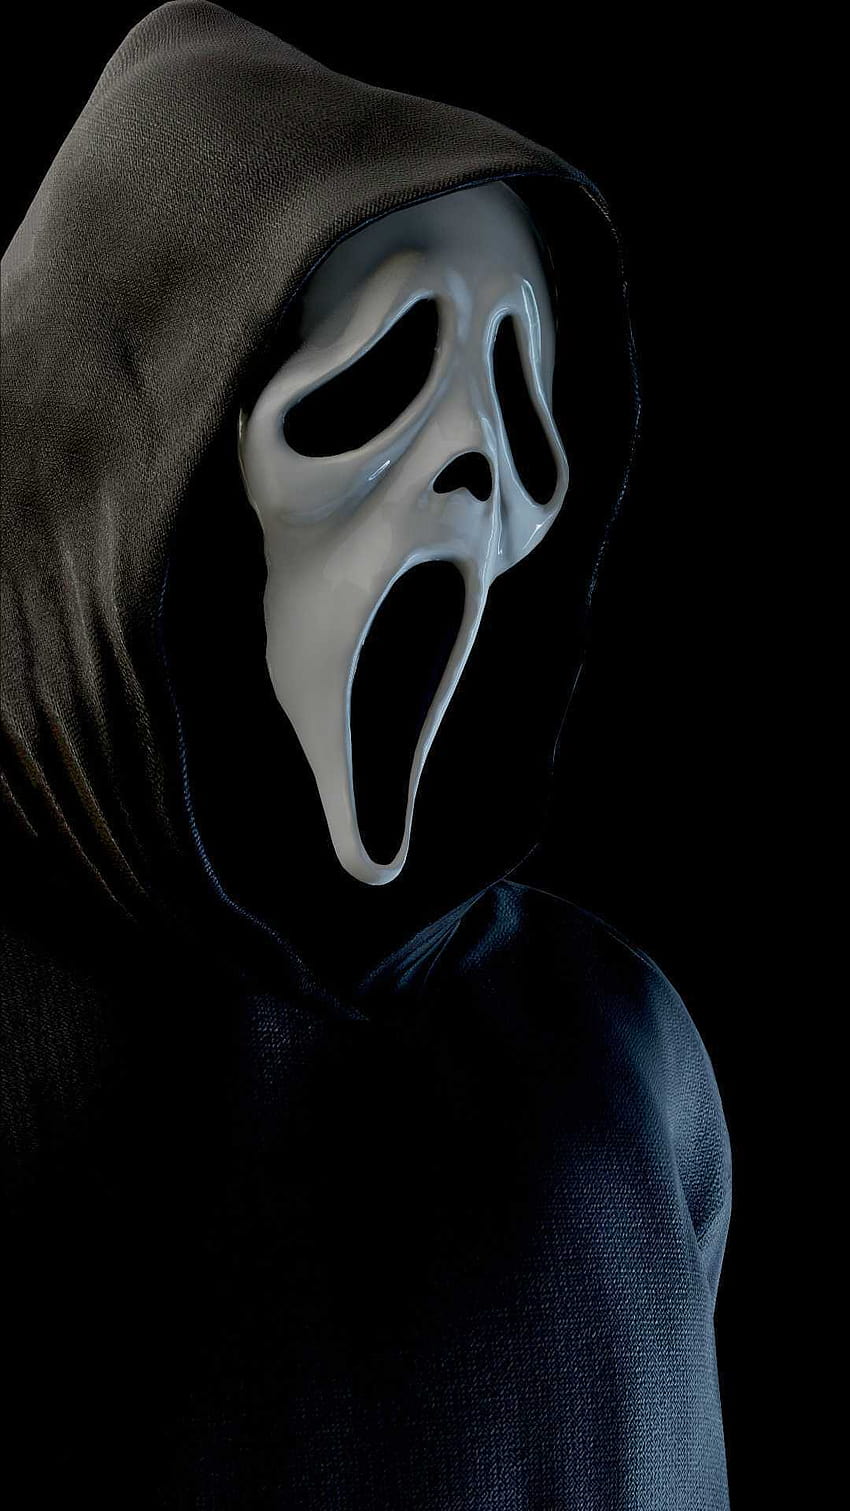 A person wearing an outfit with white face paint - Ghostface